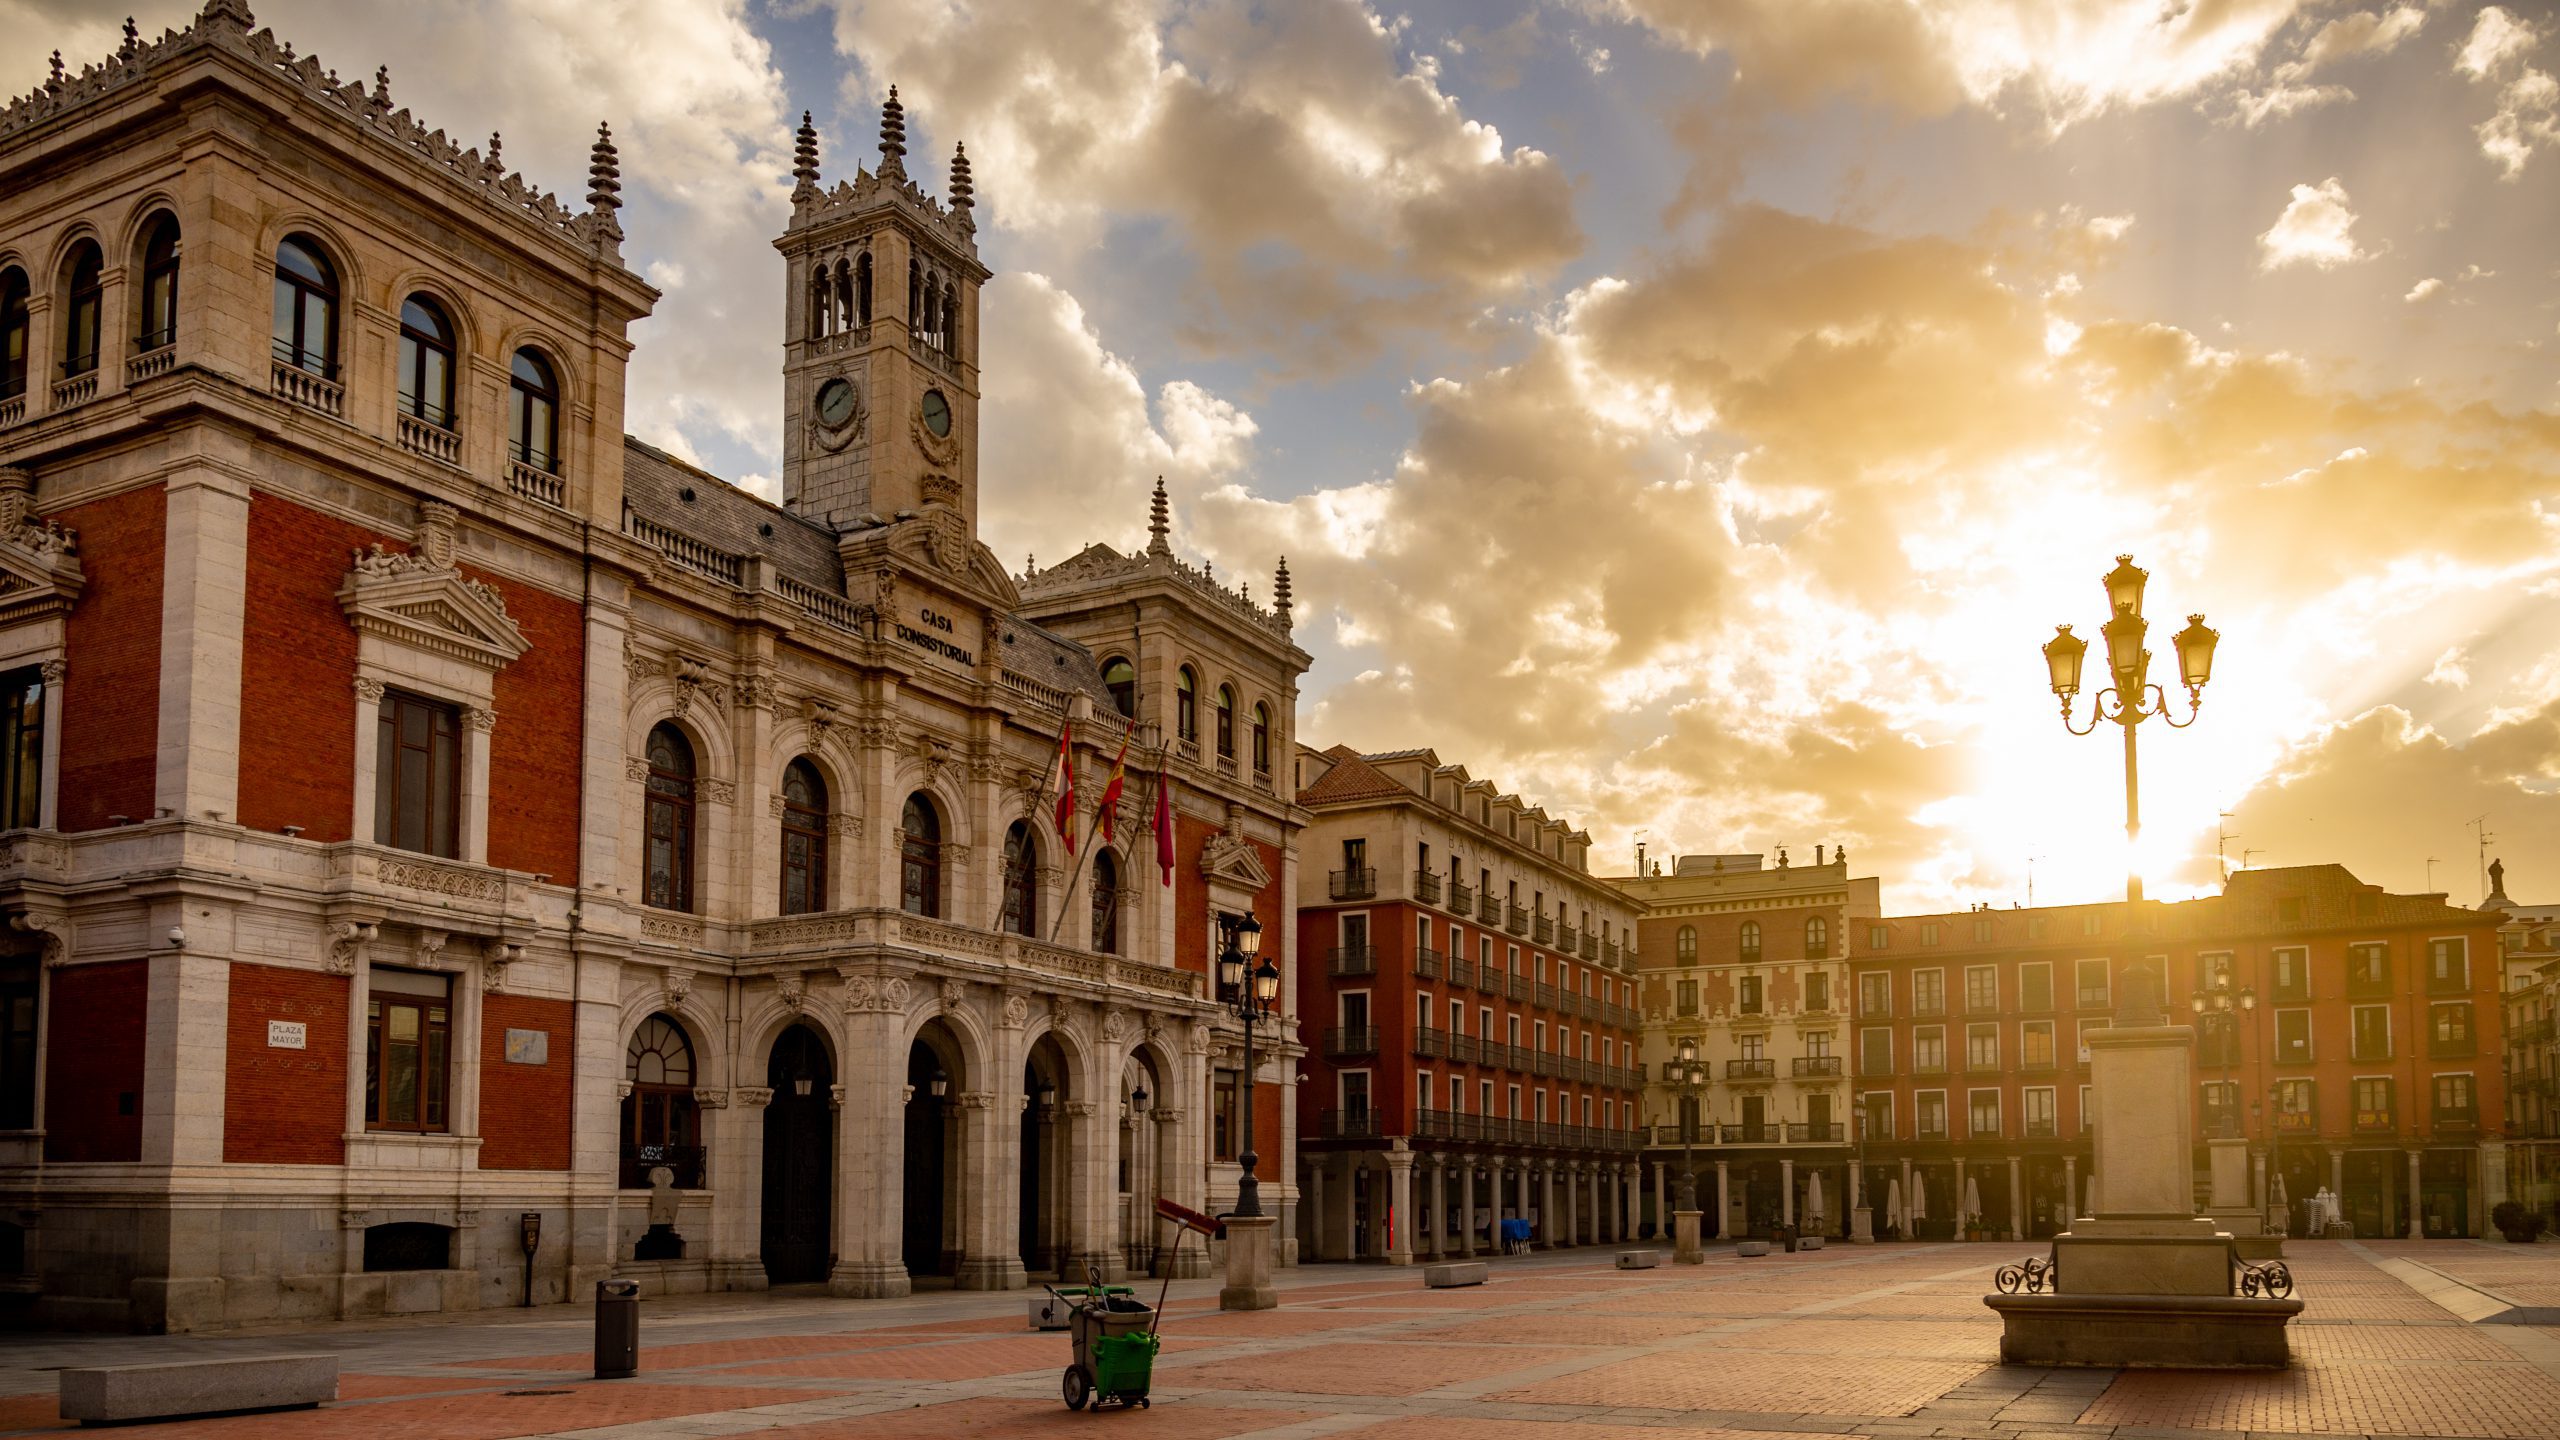 Plaza Mayor De Valladolid with the town hall in Spain